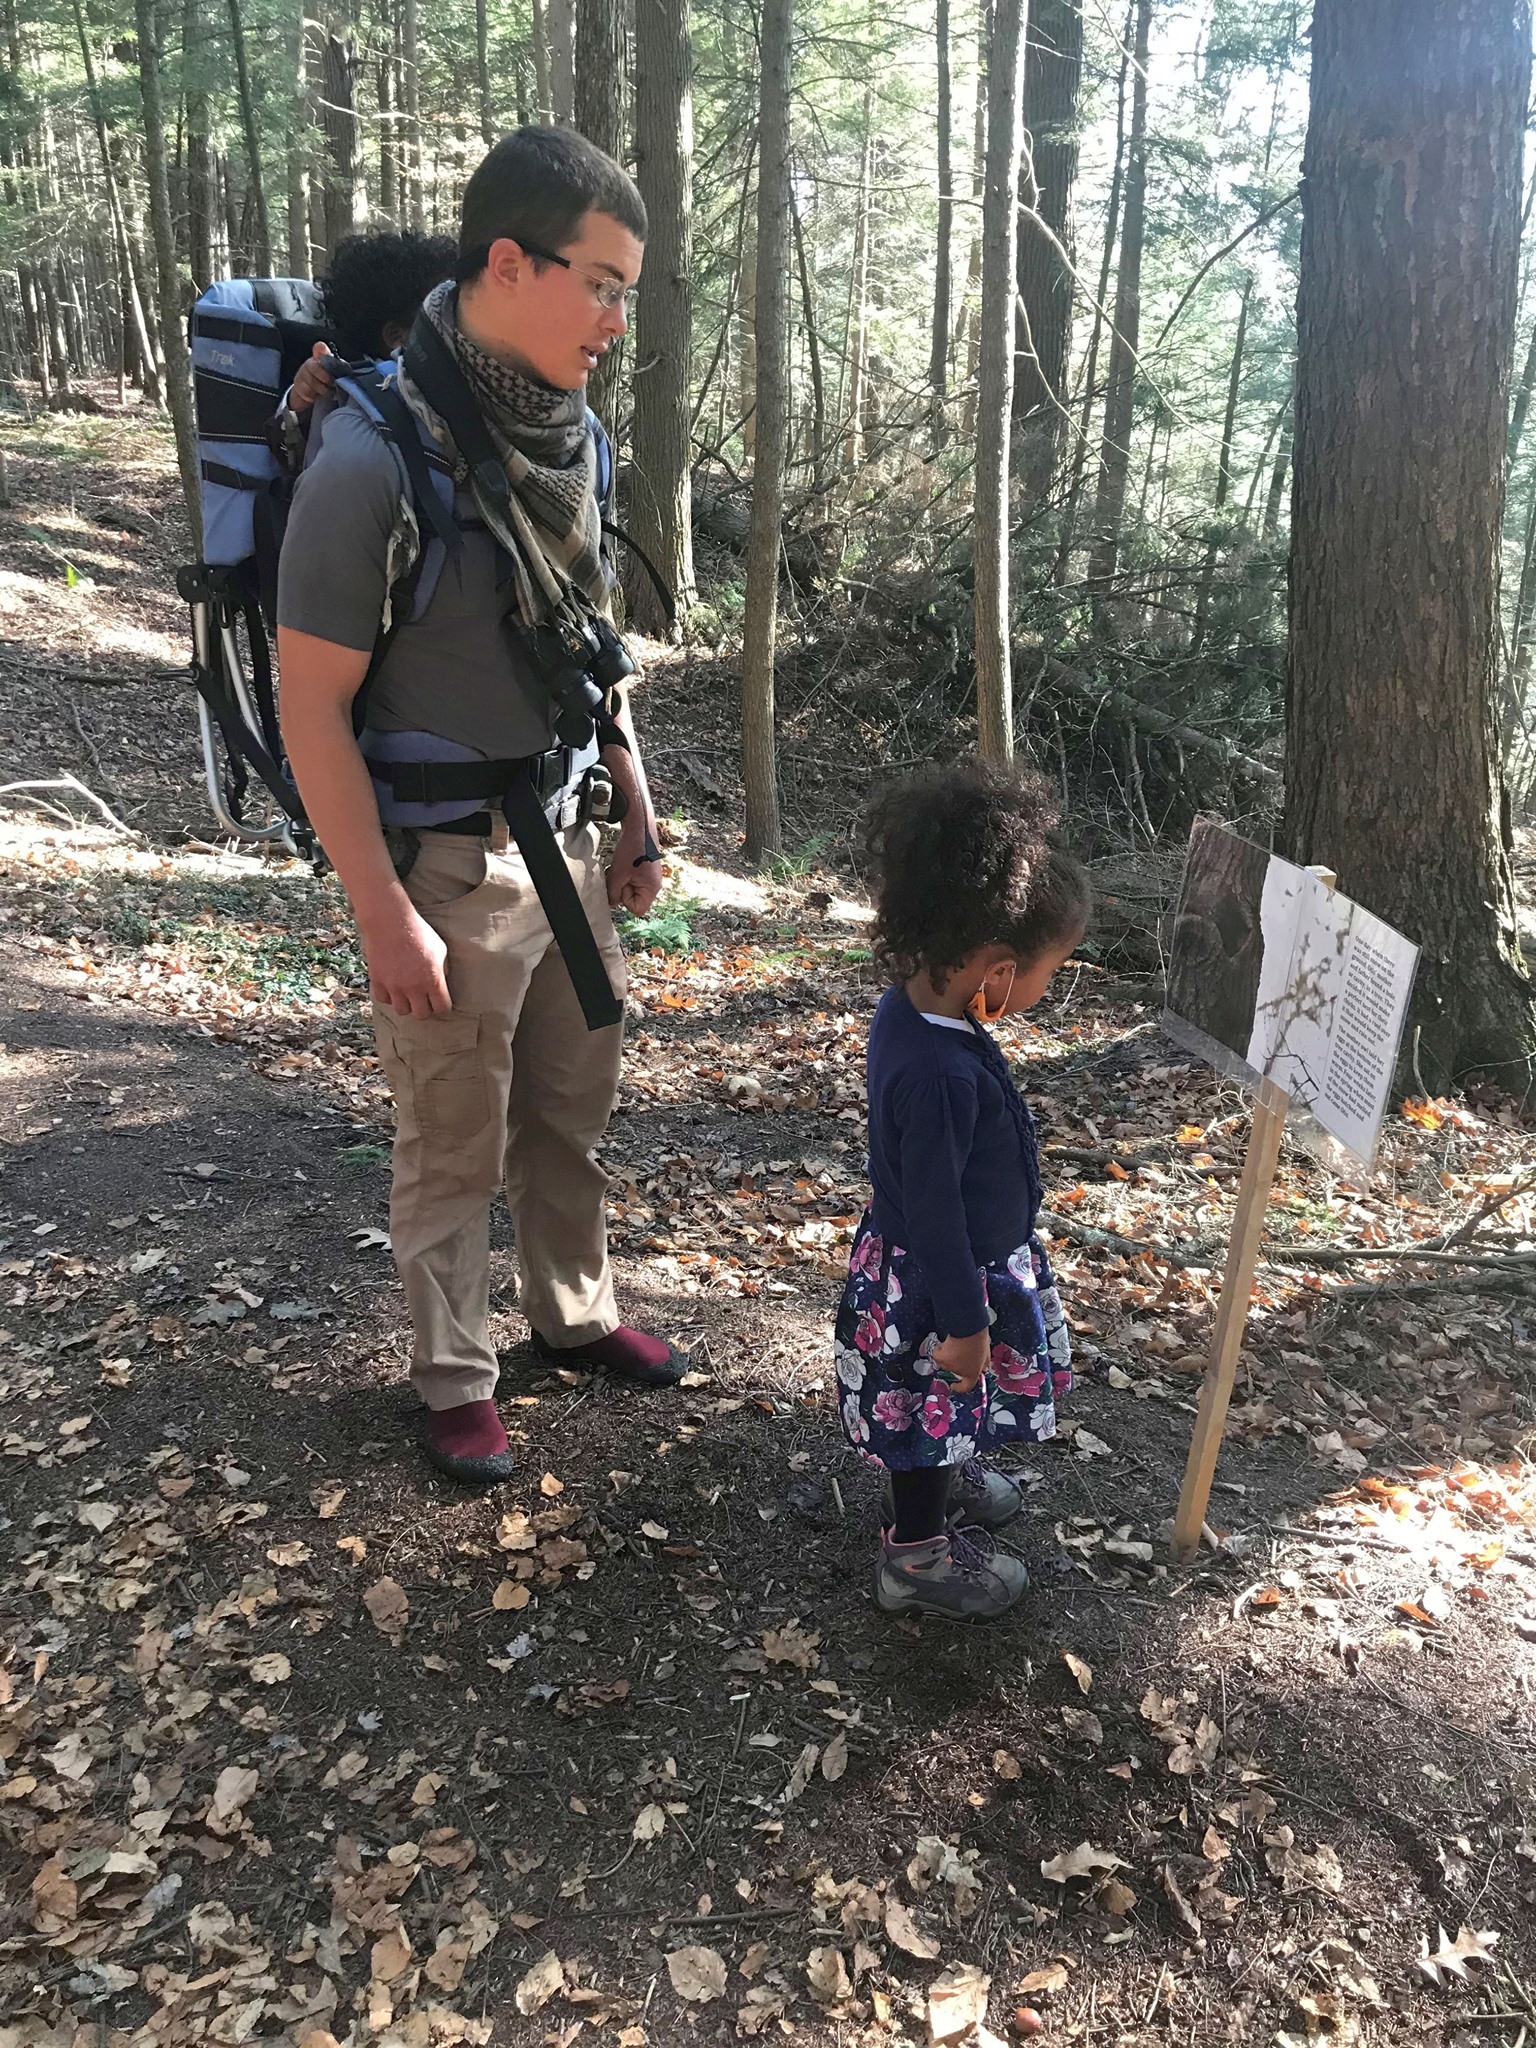 Family Self-Guided StoryWalk® at The Boulders!